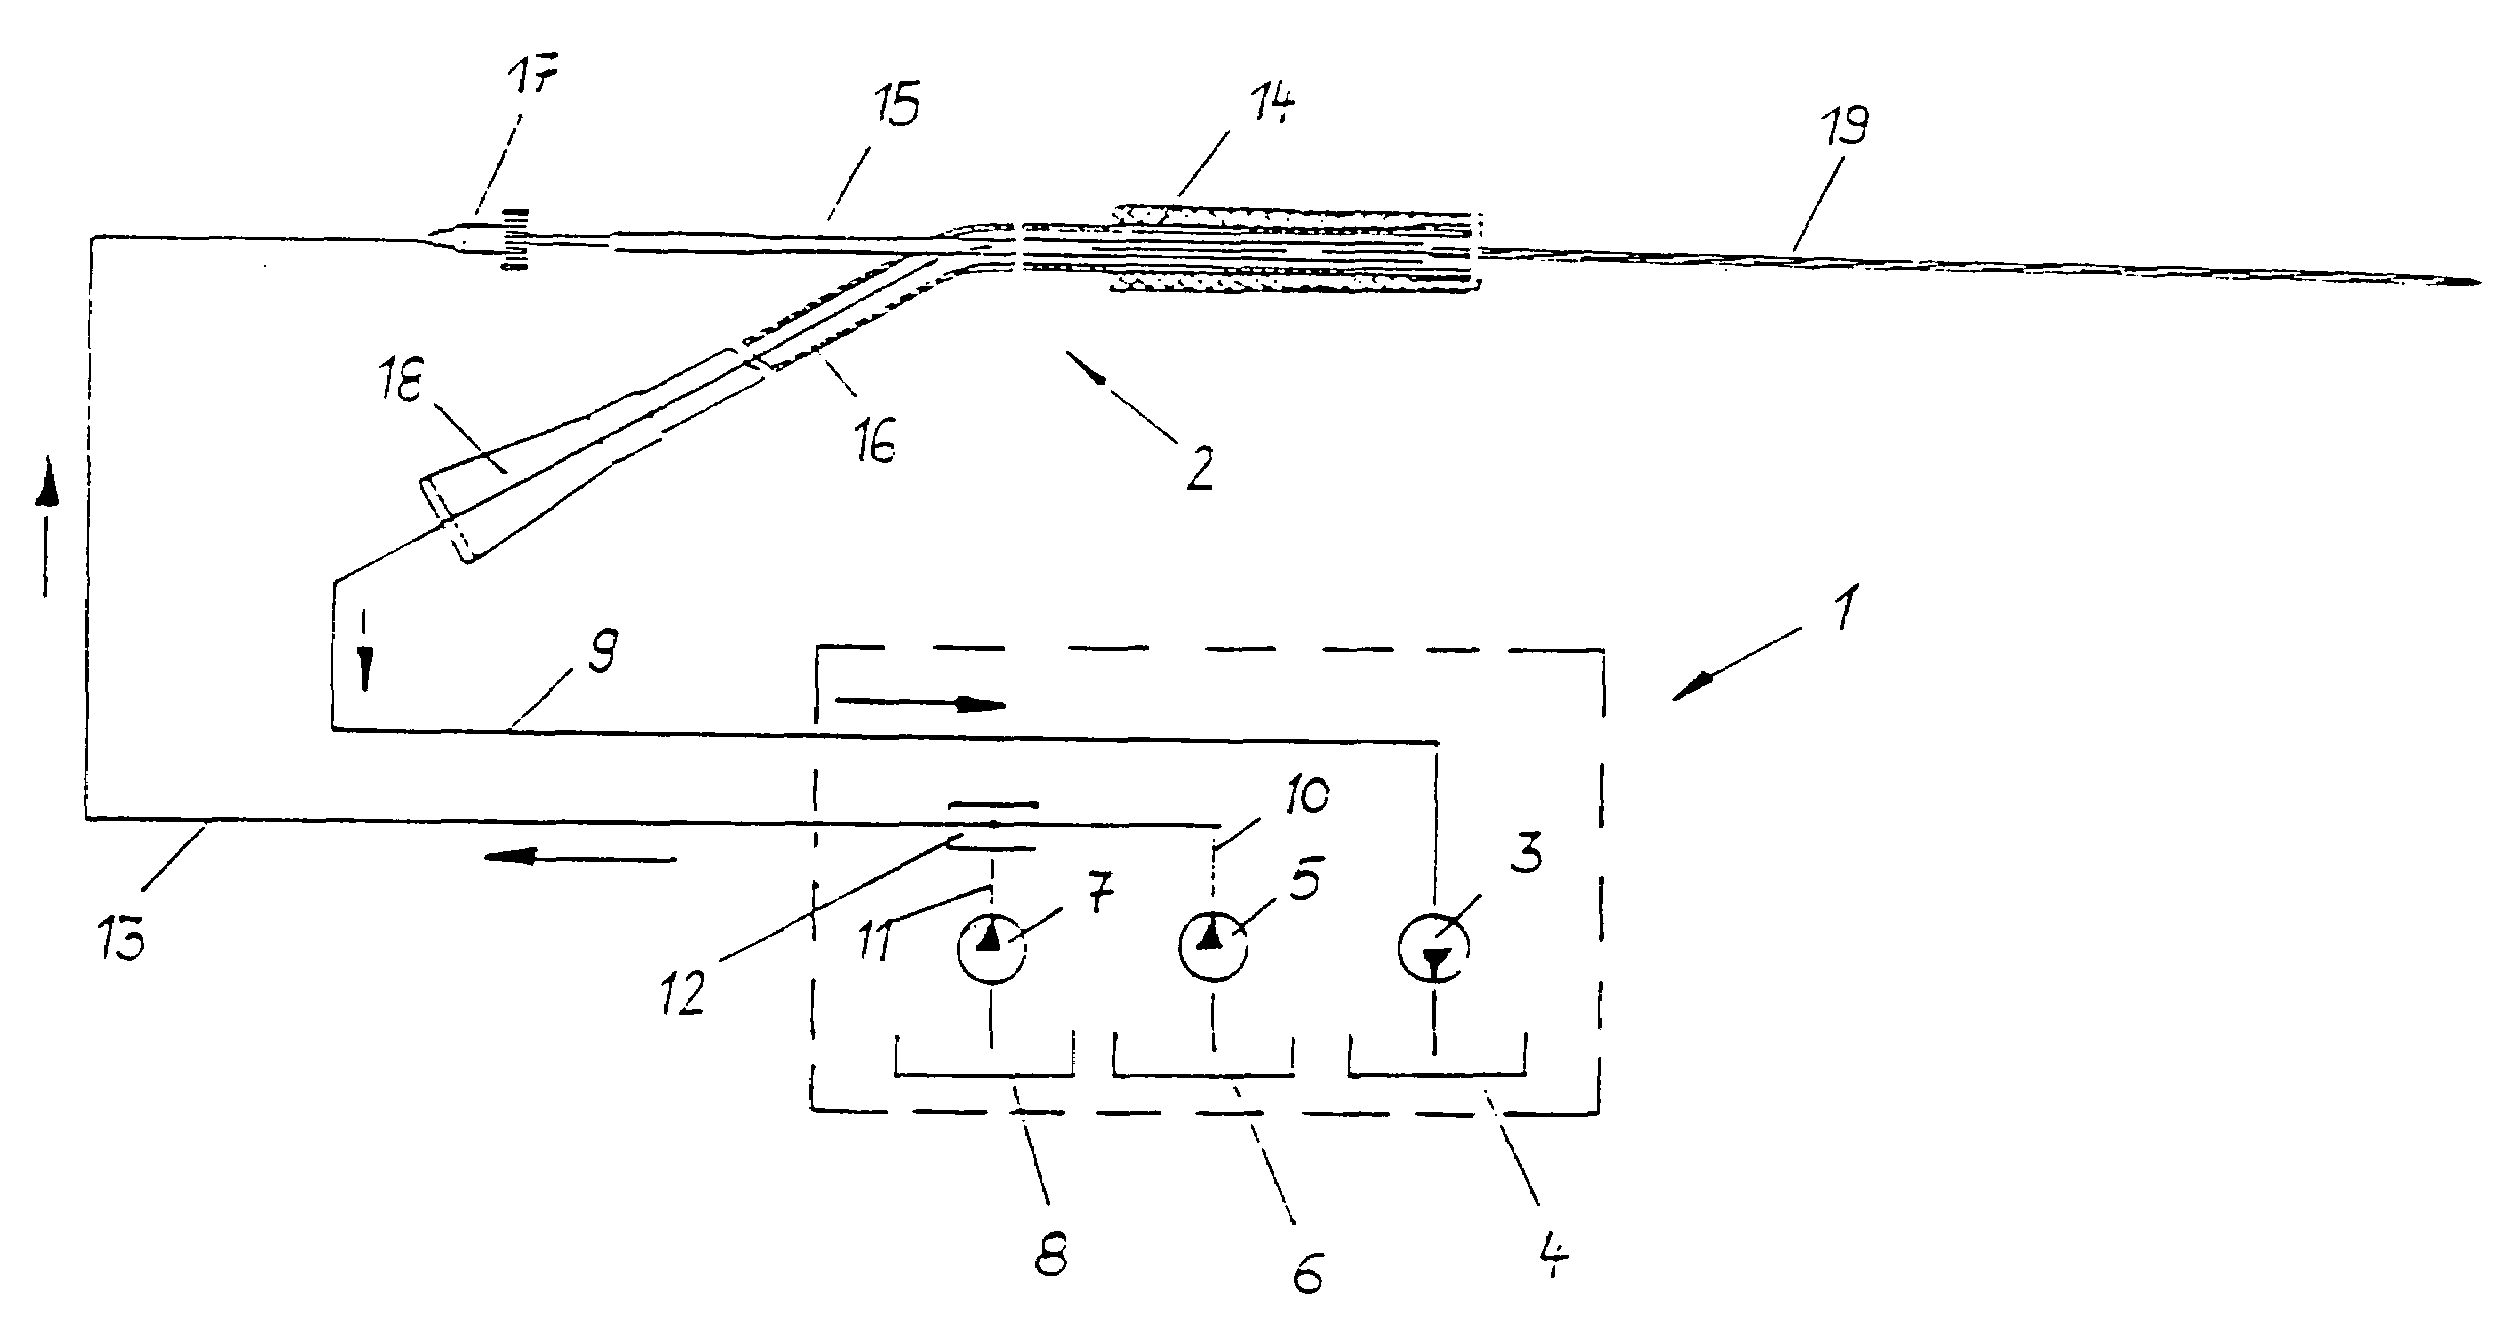 Surgical device for removing tissue cells from a biological structure